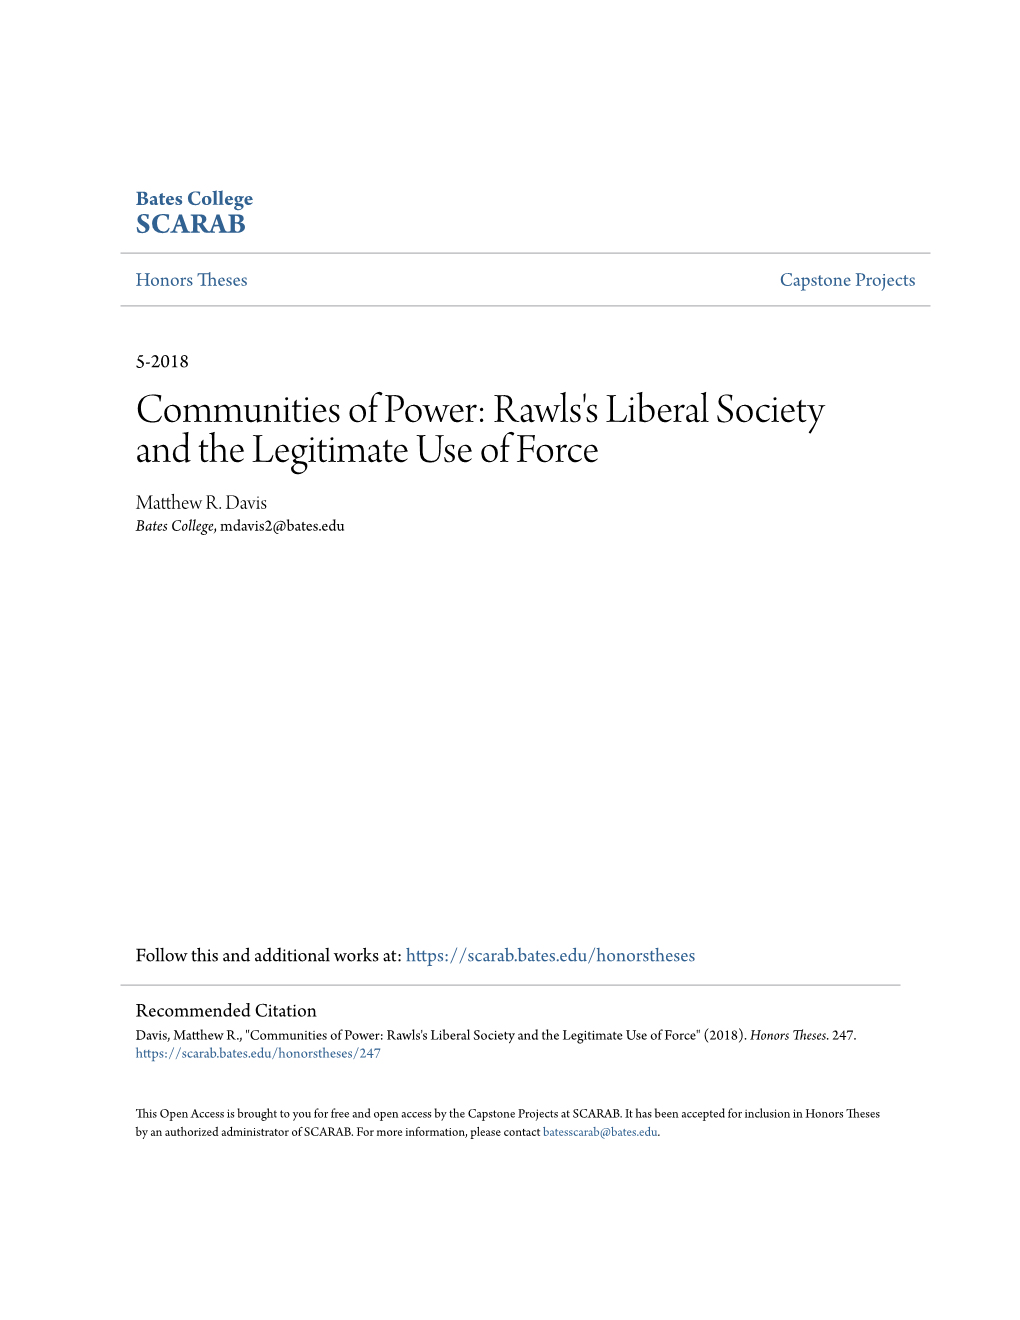 Rawls's Liberal Society and the Legitimate Use of Force Matthew R